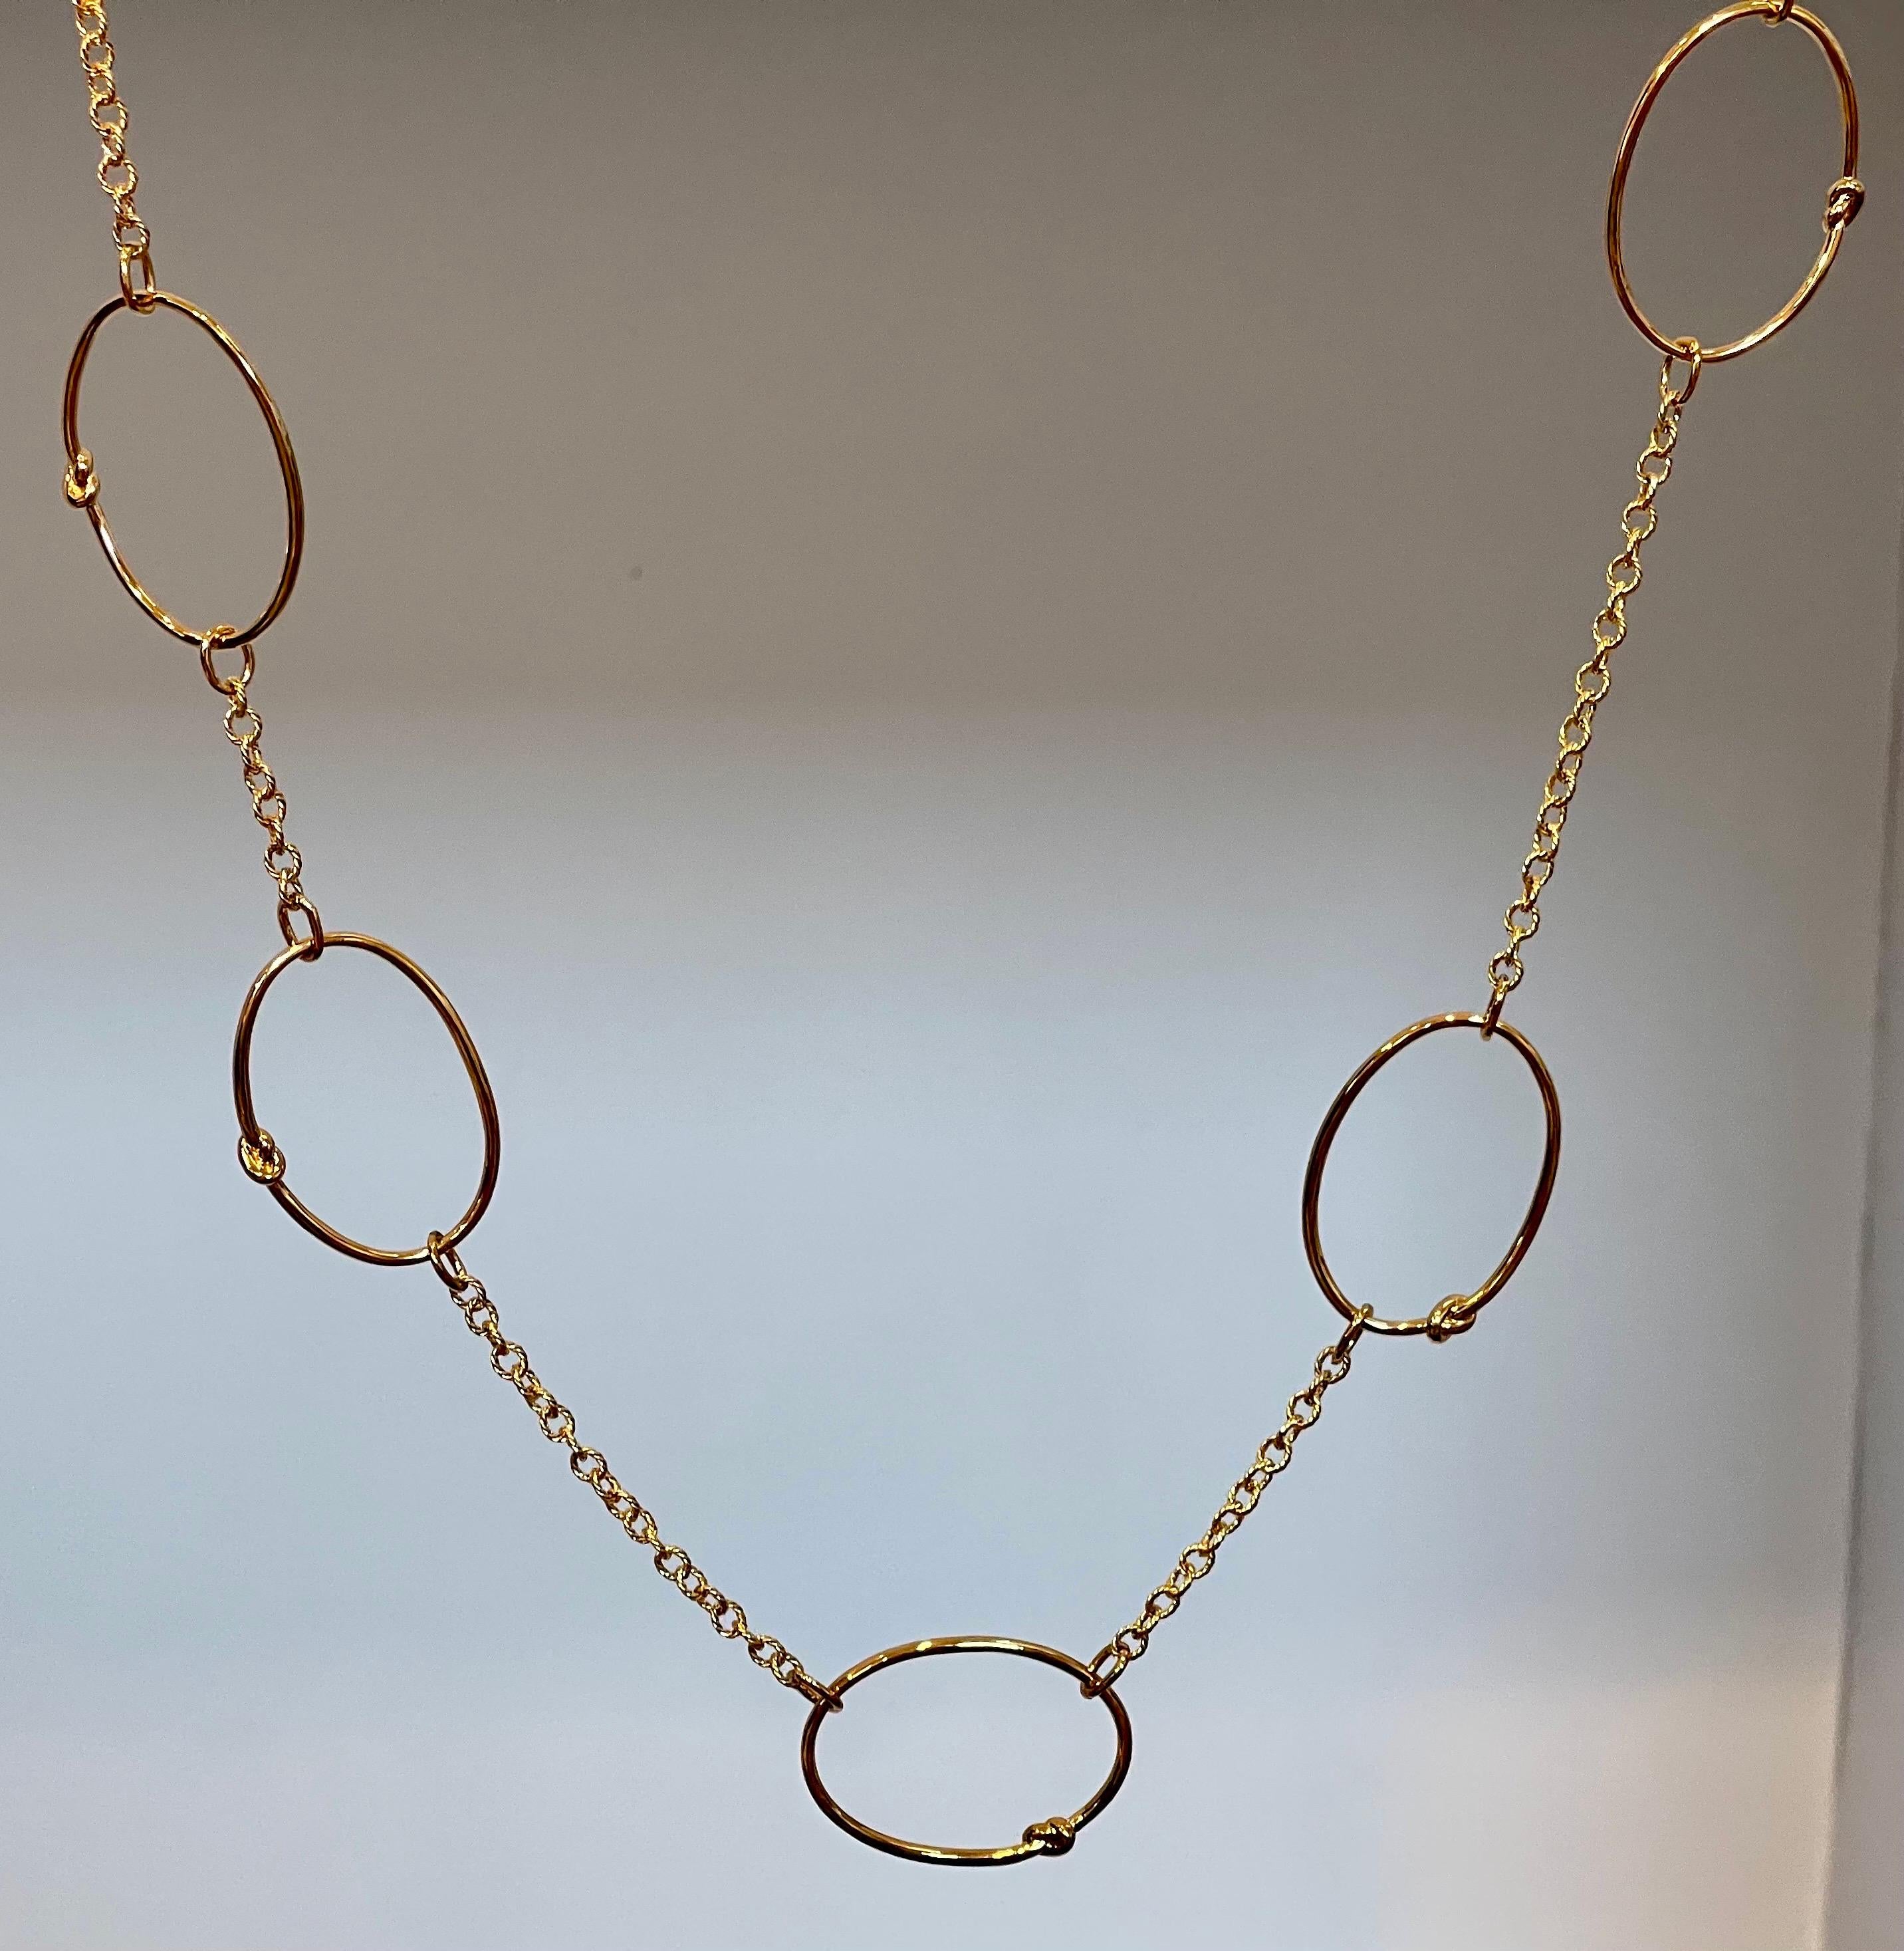  Timeless Elegance  5 Circle Sterling Silver Necklace With Gold Polish
This Necklace  is  amazing . Very Fashionable
Pure sterling silver which will not tarnish over time.
26 inch long

Weight of the bracelet is 26 grams
I guaranteed you will be